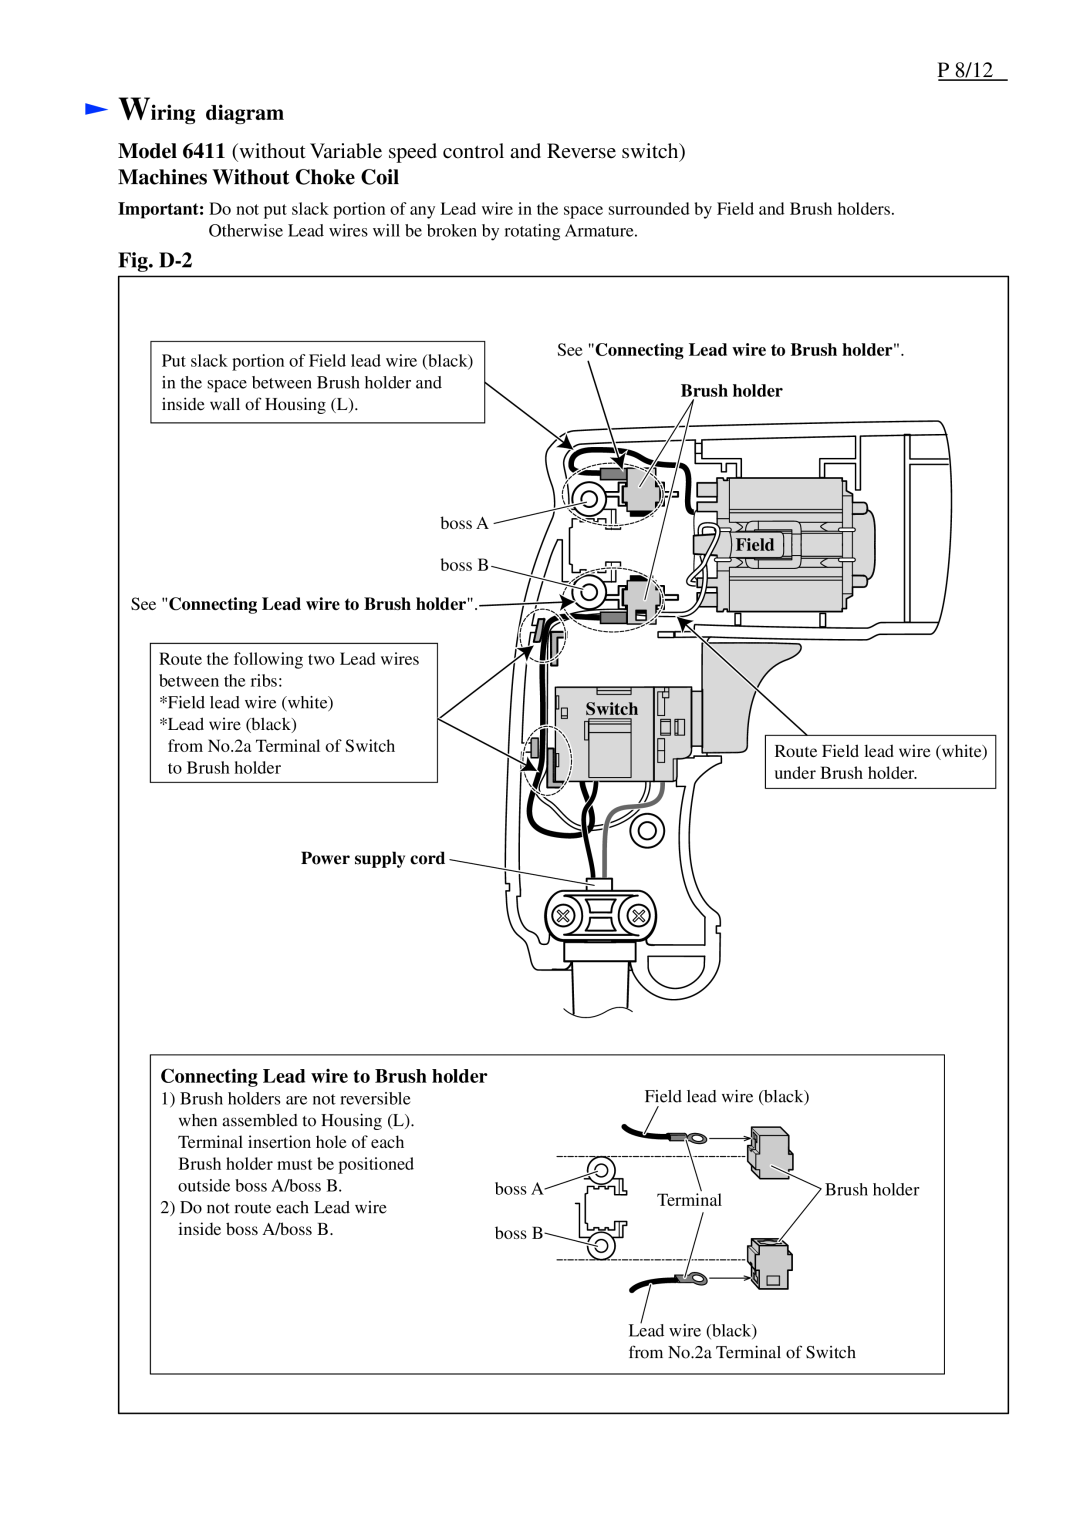 Makita M611 P 8/12, Wiring diagram, Machines Without Choke Coil, Fig. D-2, Connecting Lead wire to Brush holder, Switch 